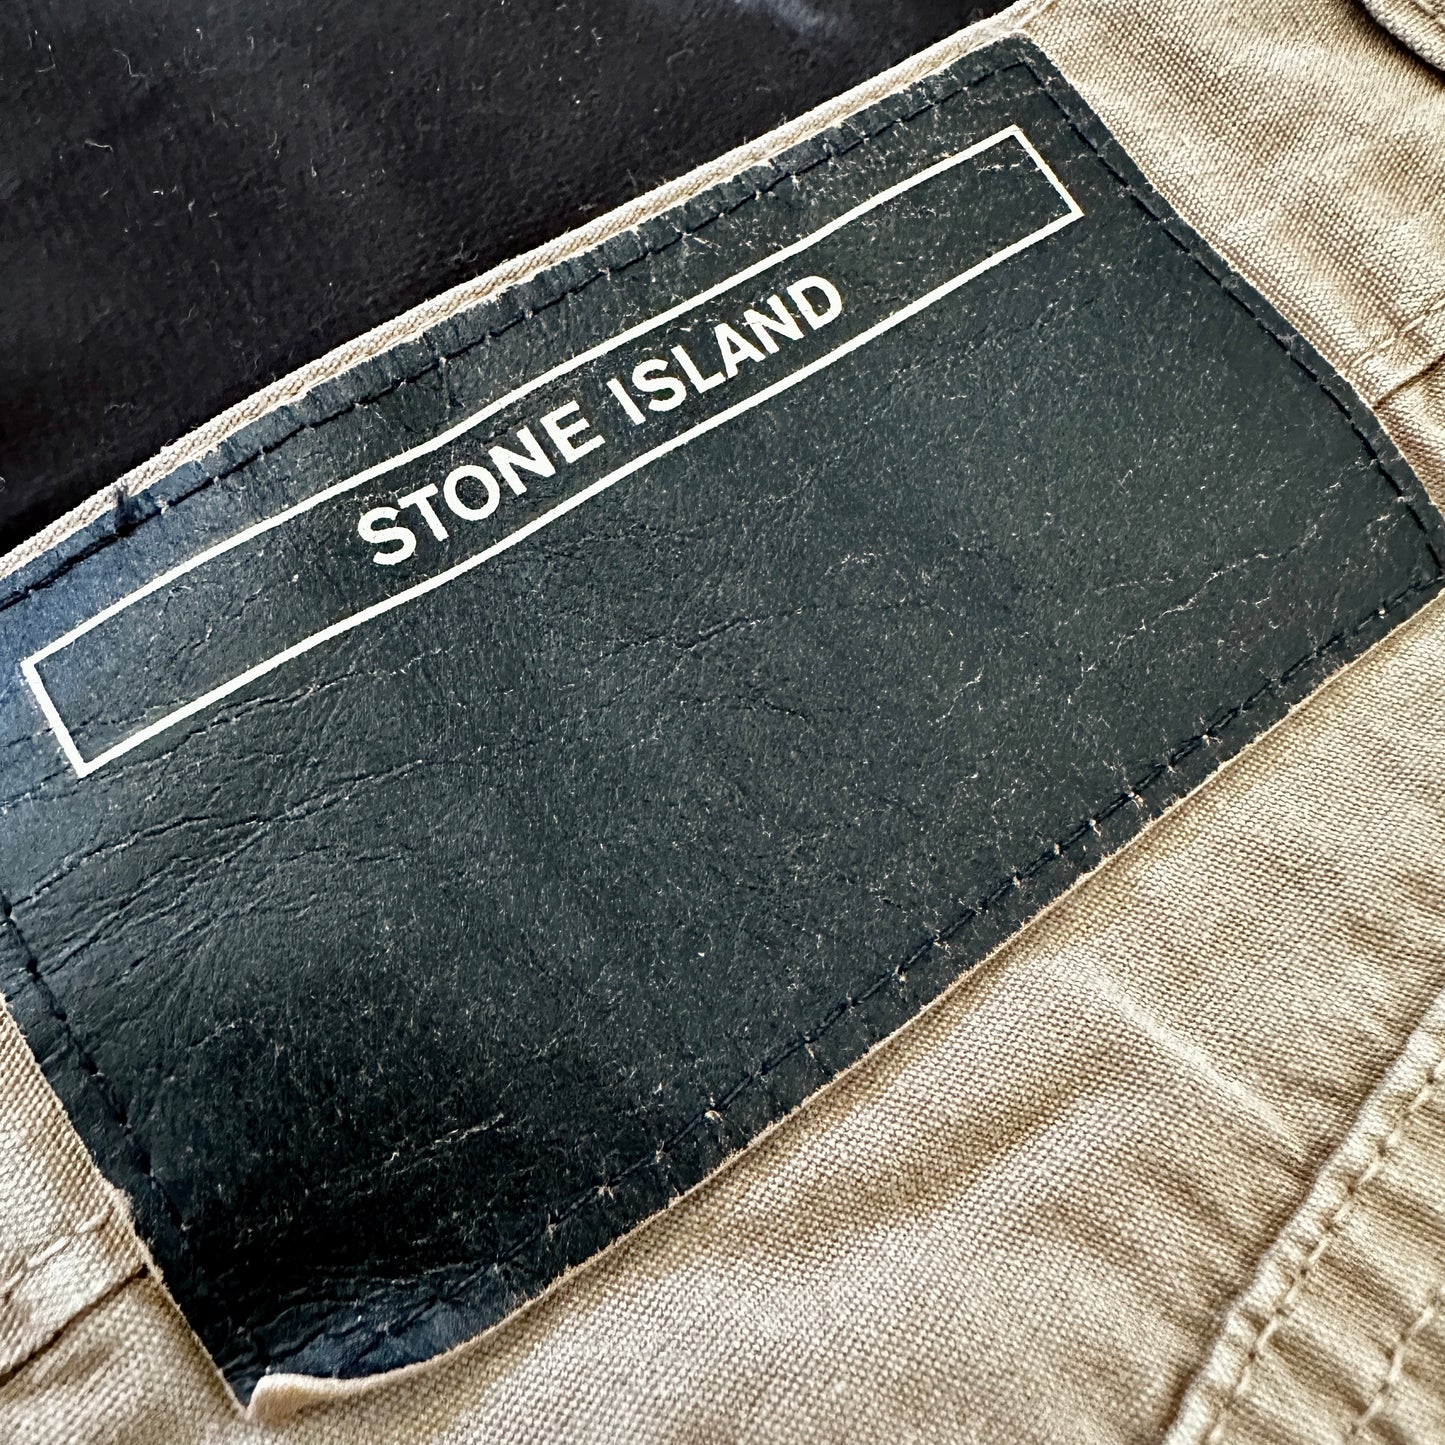 Stone Island Denims Pants - 34 - Made in Italy